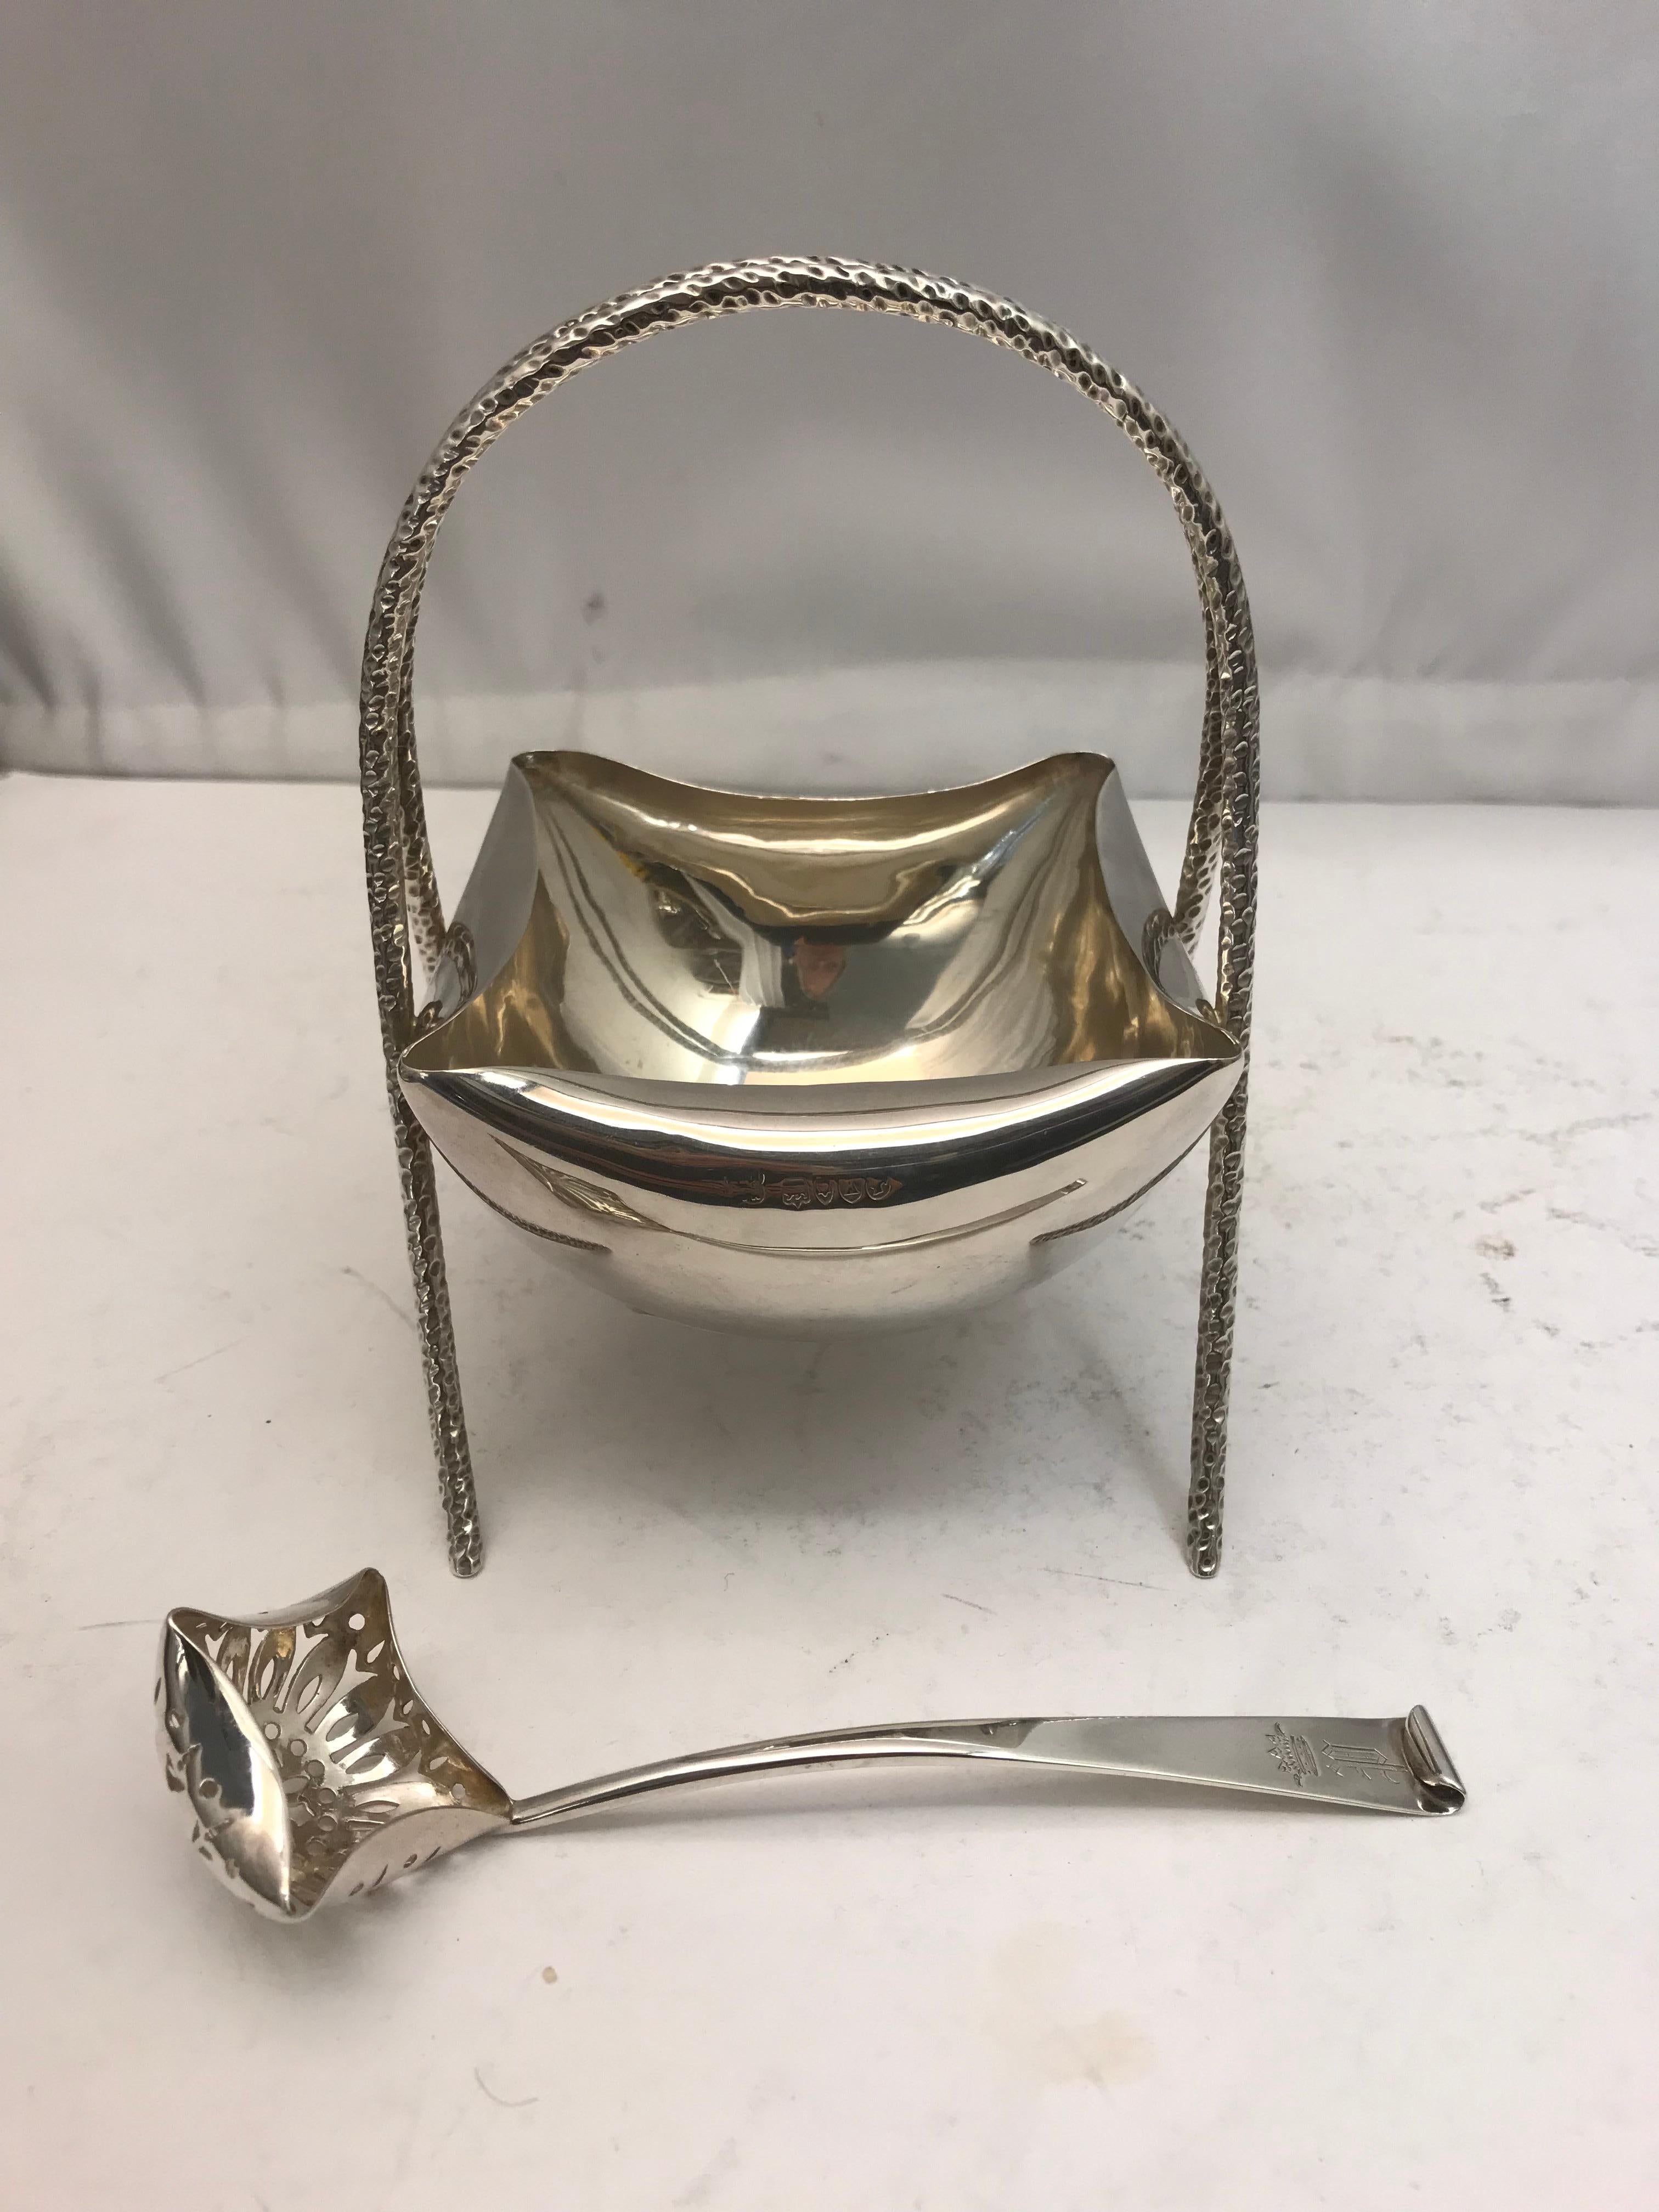 A charming silver Victorian bowl with a bent edge a handle adapted in the shape of an arch with a matching sifter spoon.

Marked on the top edge. Made by Huki & Heath London 1885.

This attractive bowl and spoon is in very good condition with no